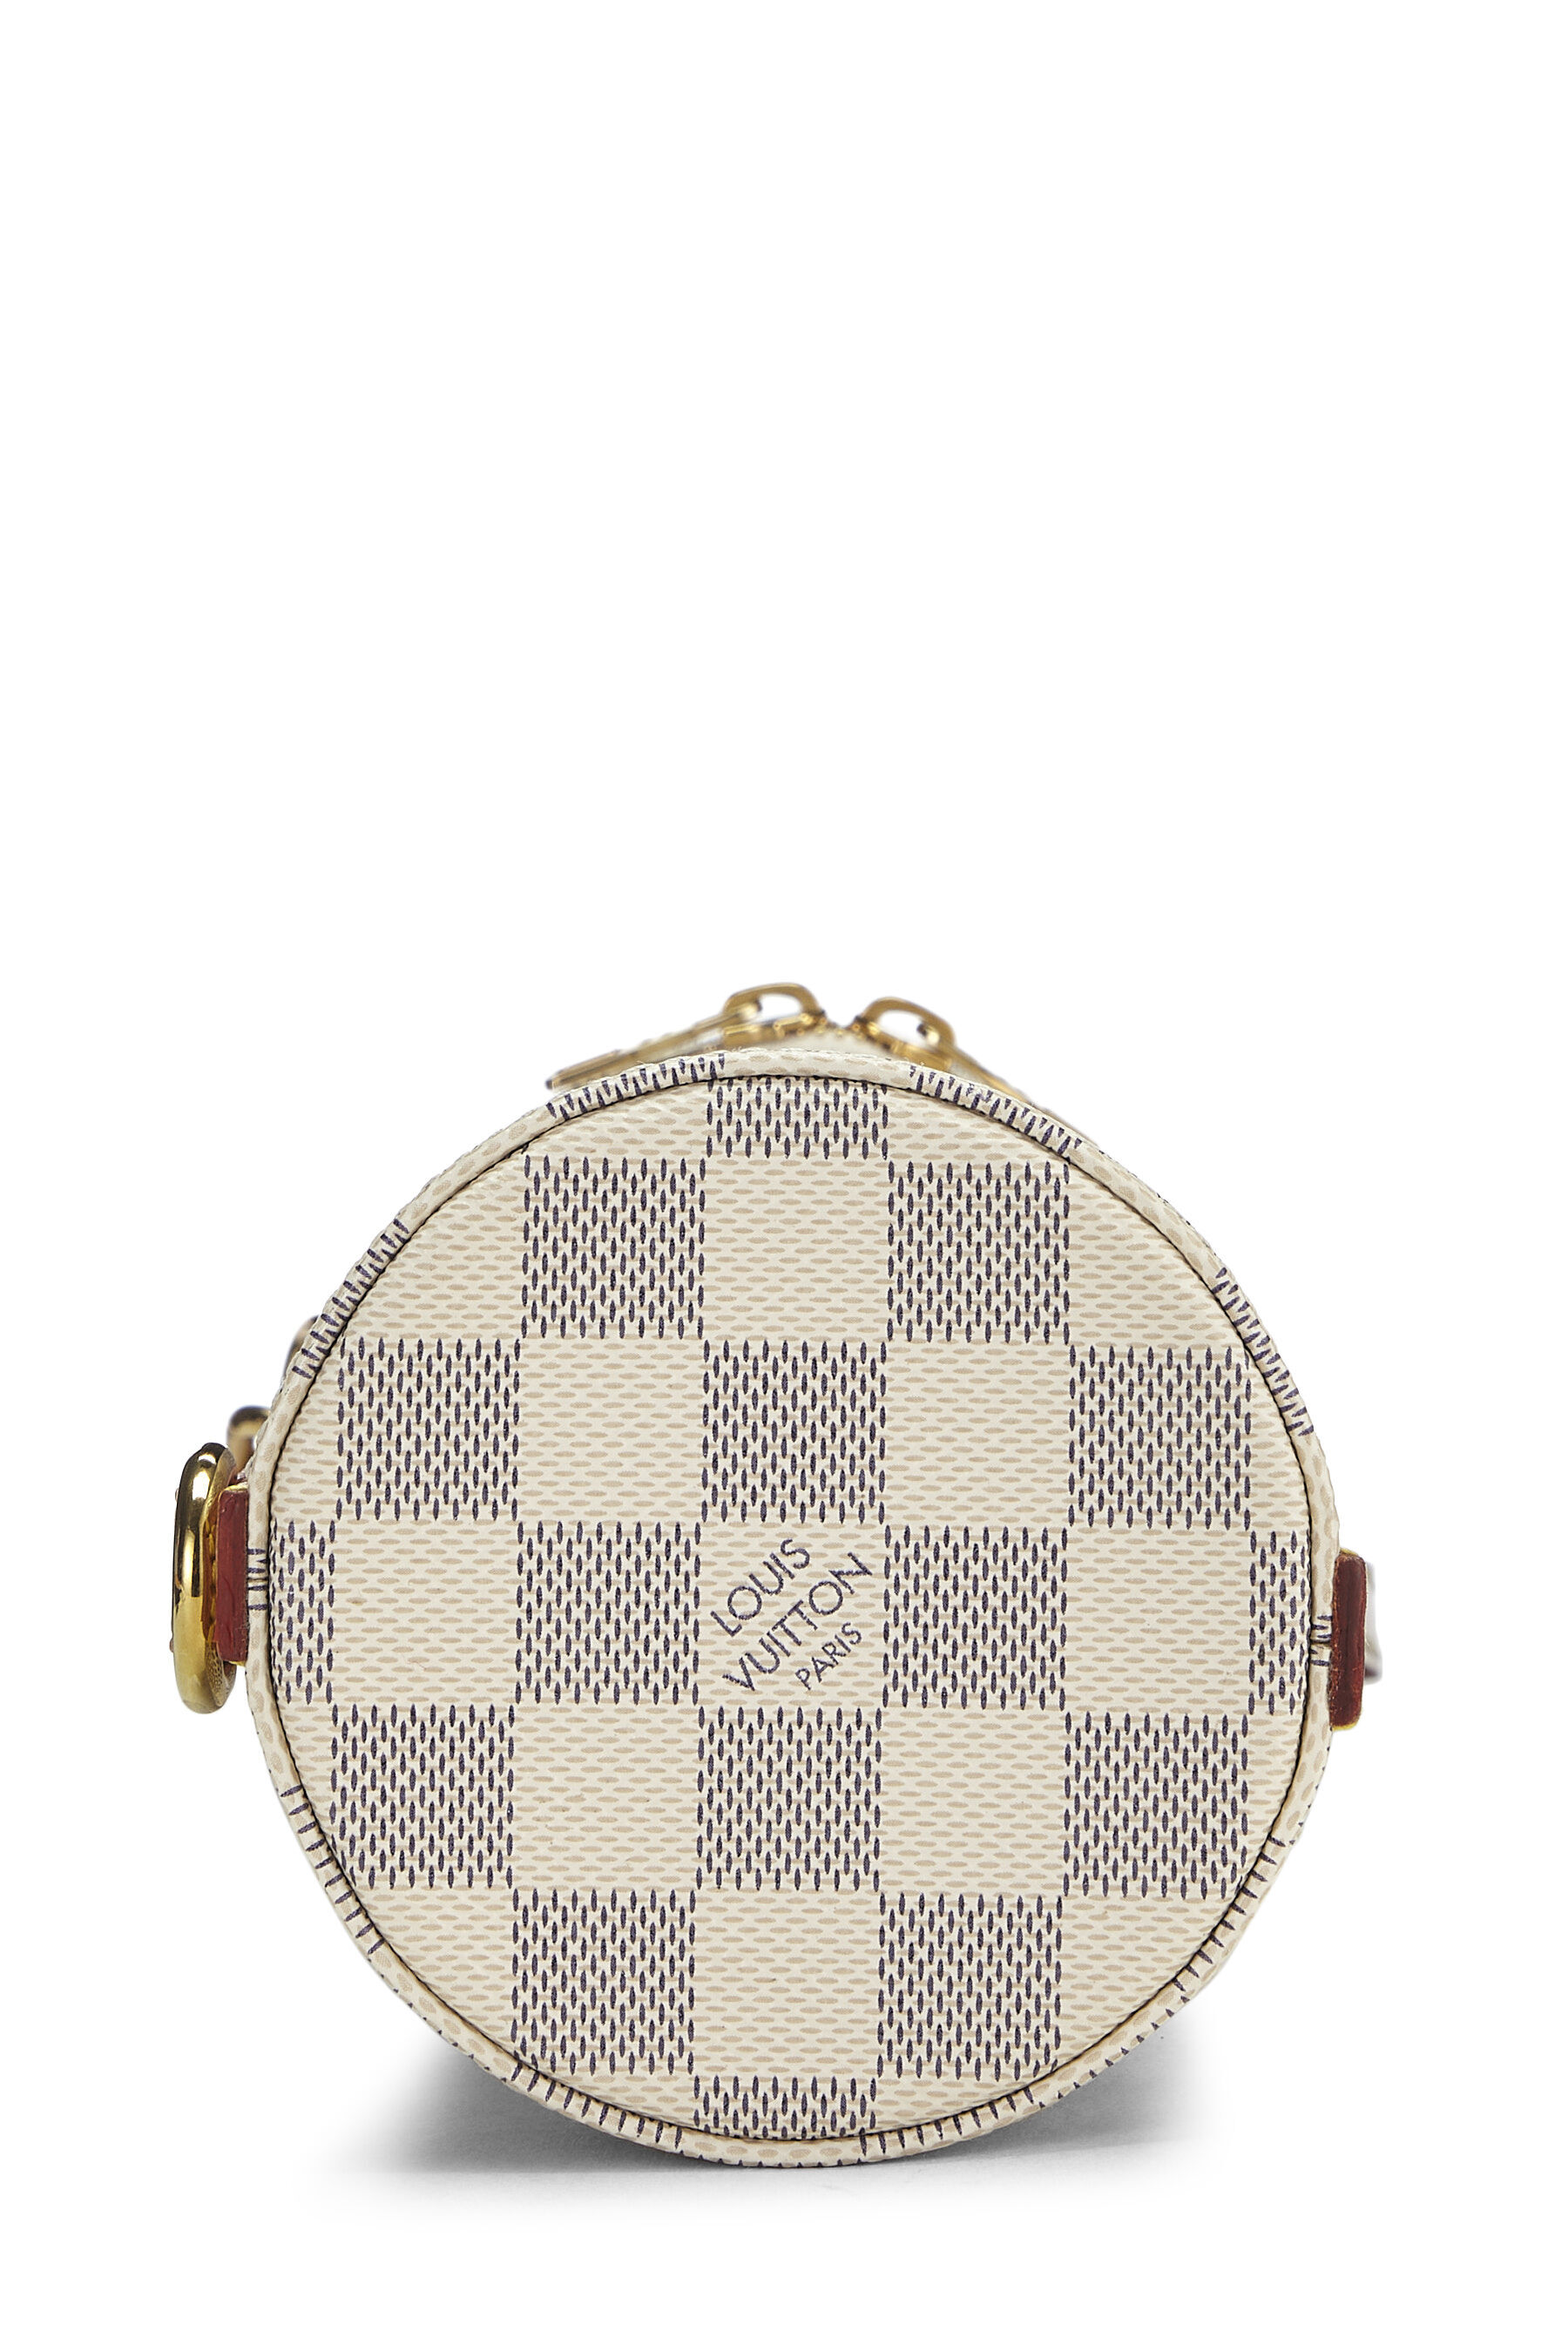 LOUIS VUITTON EXTREMELY Beautiful Damier Graphite Zippy Coin Purse Round  For Men £251.49 - PicClick UK